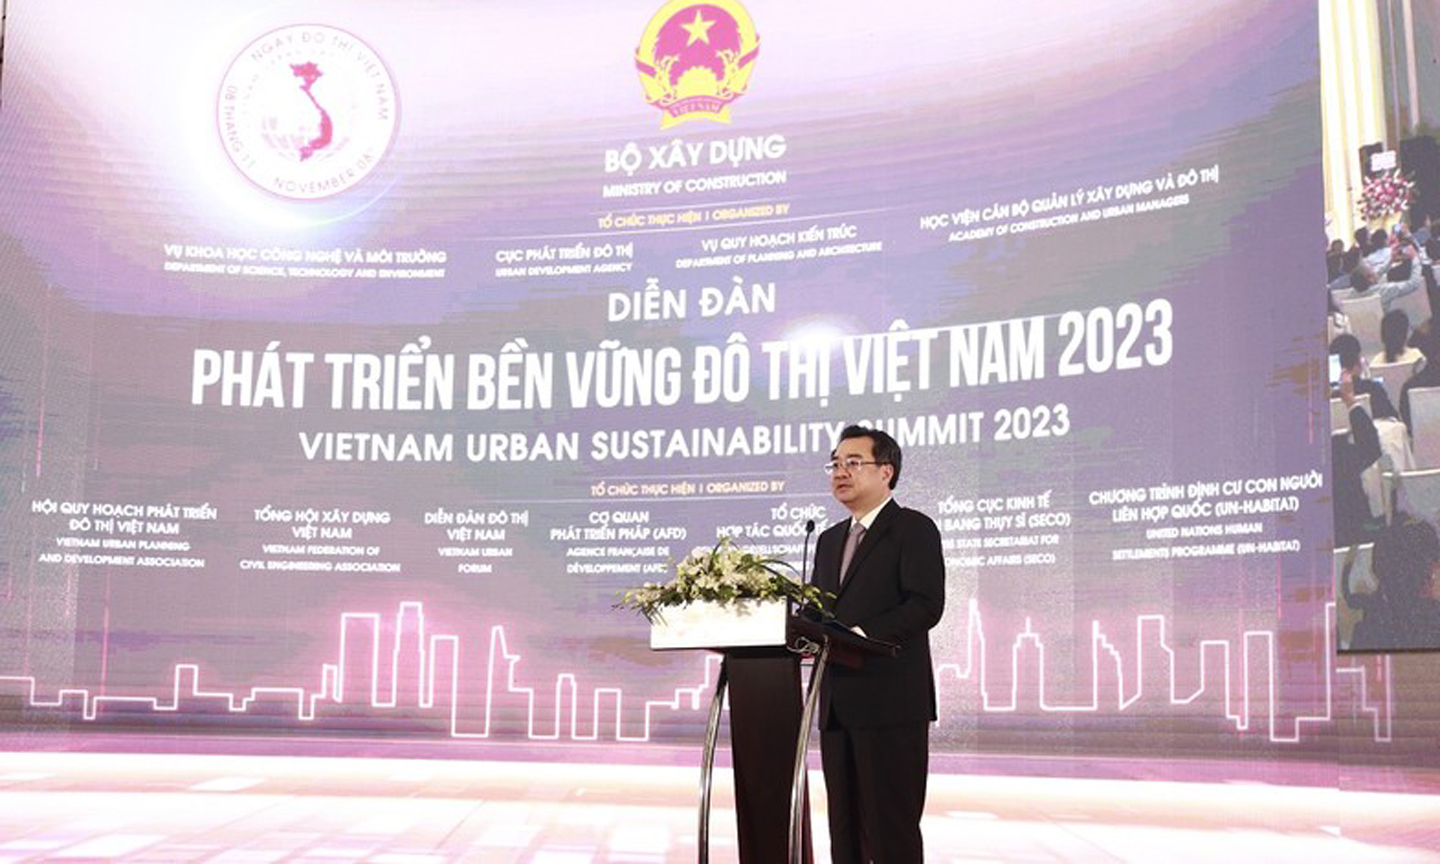 ABO/NDO- The Vietnam Urban Sustainability Summit 2023 was held by the Ministry of Construction in Hanoi on November 8 to discuss improvements to legal frameworks and policies to foster urban development in a green and sustainable manner.